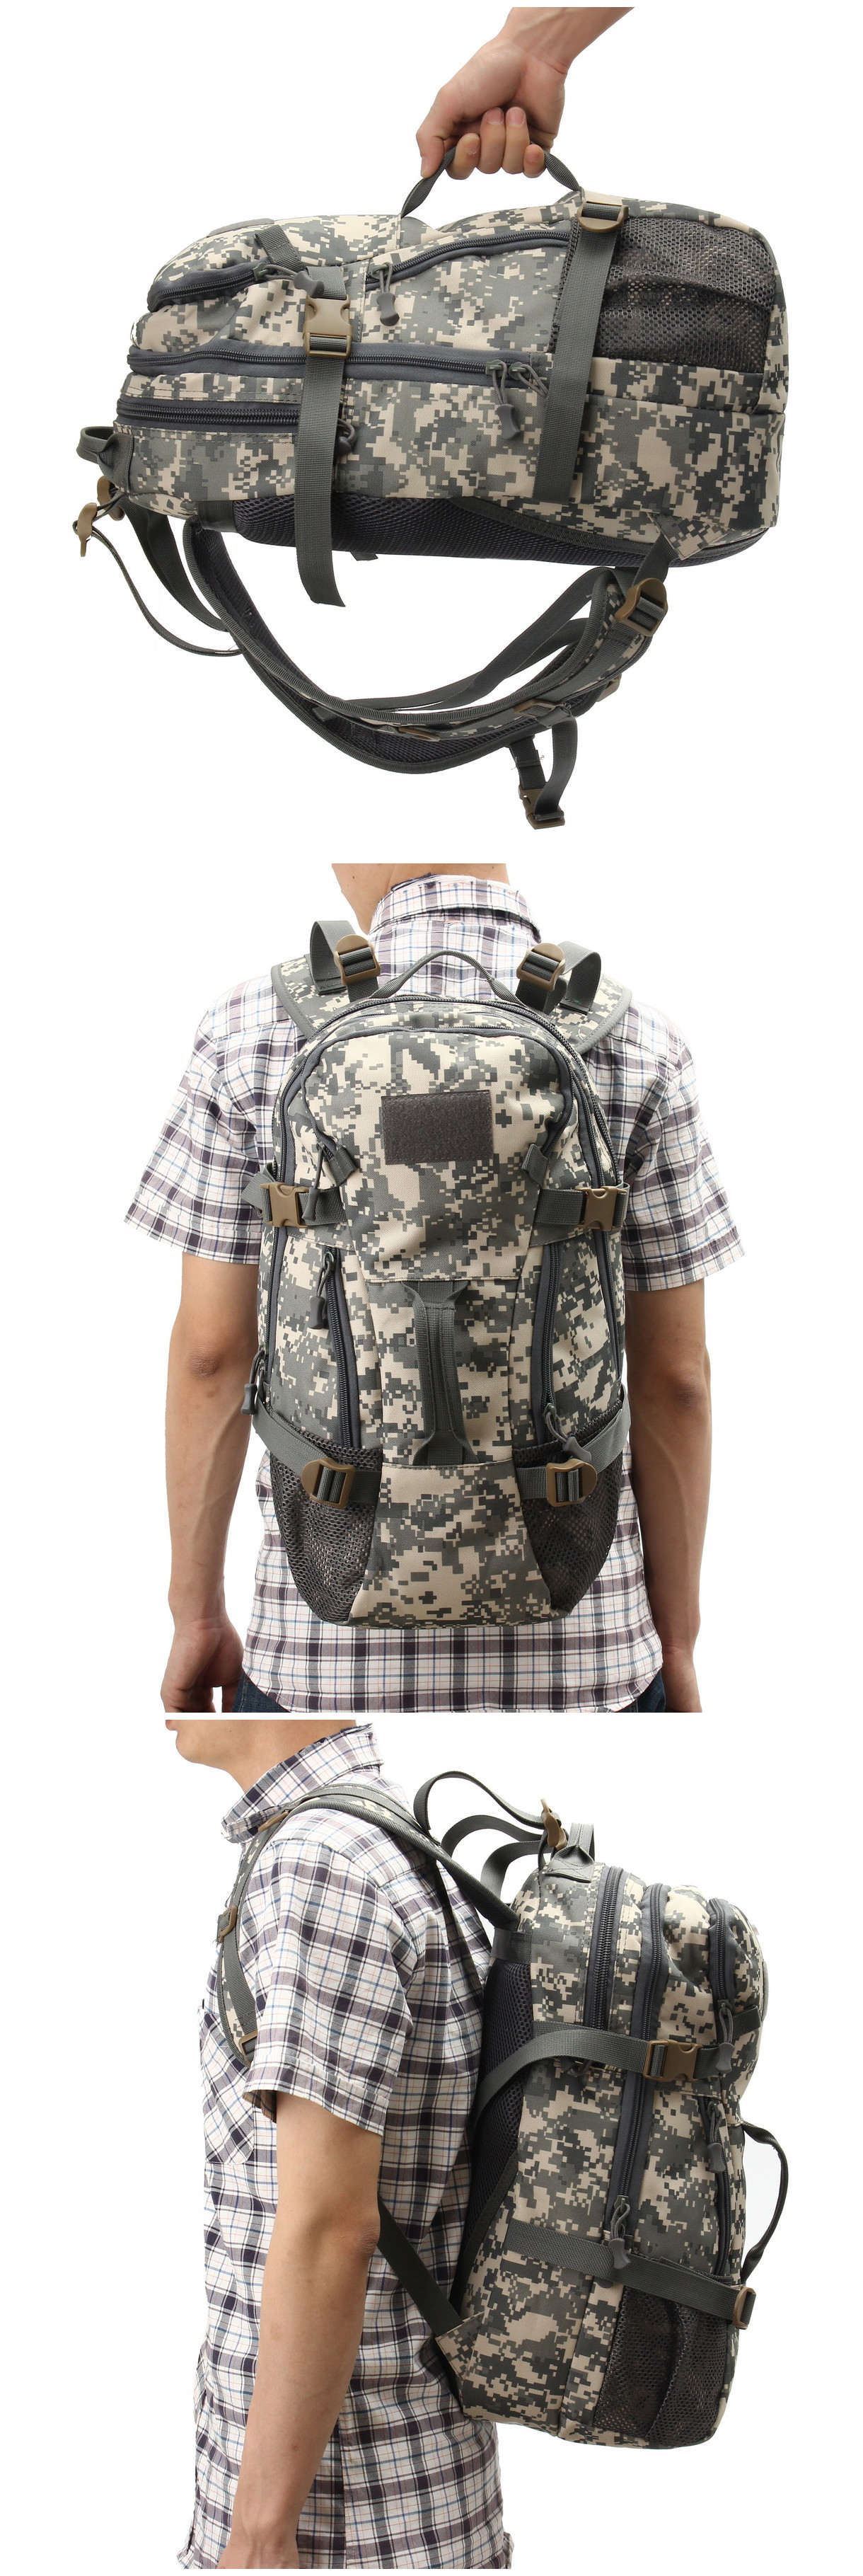 Outdoor-Camping-Tactical-Backpack-Mountaineering-Camouflage-ACU-Bag-Rucksack-1130438-5